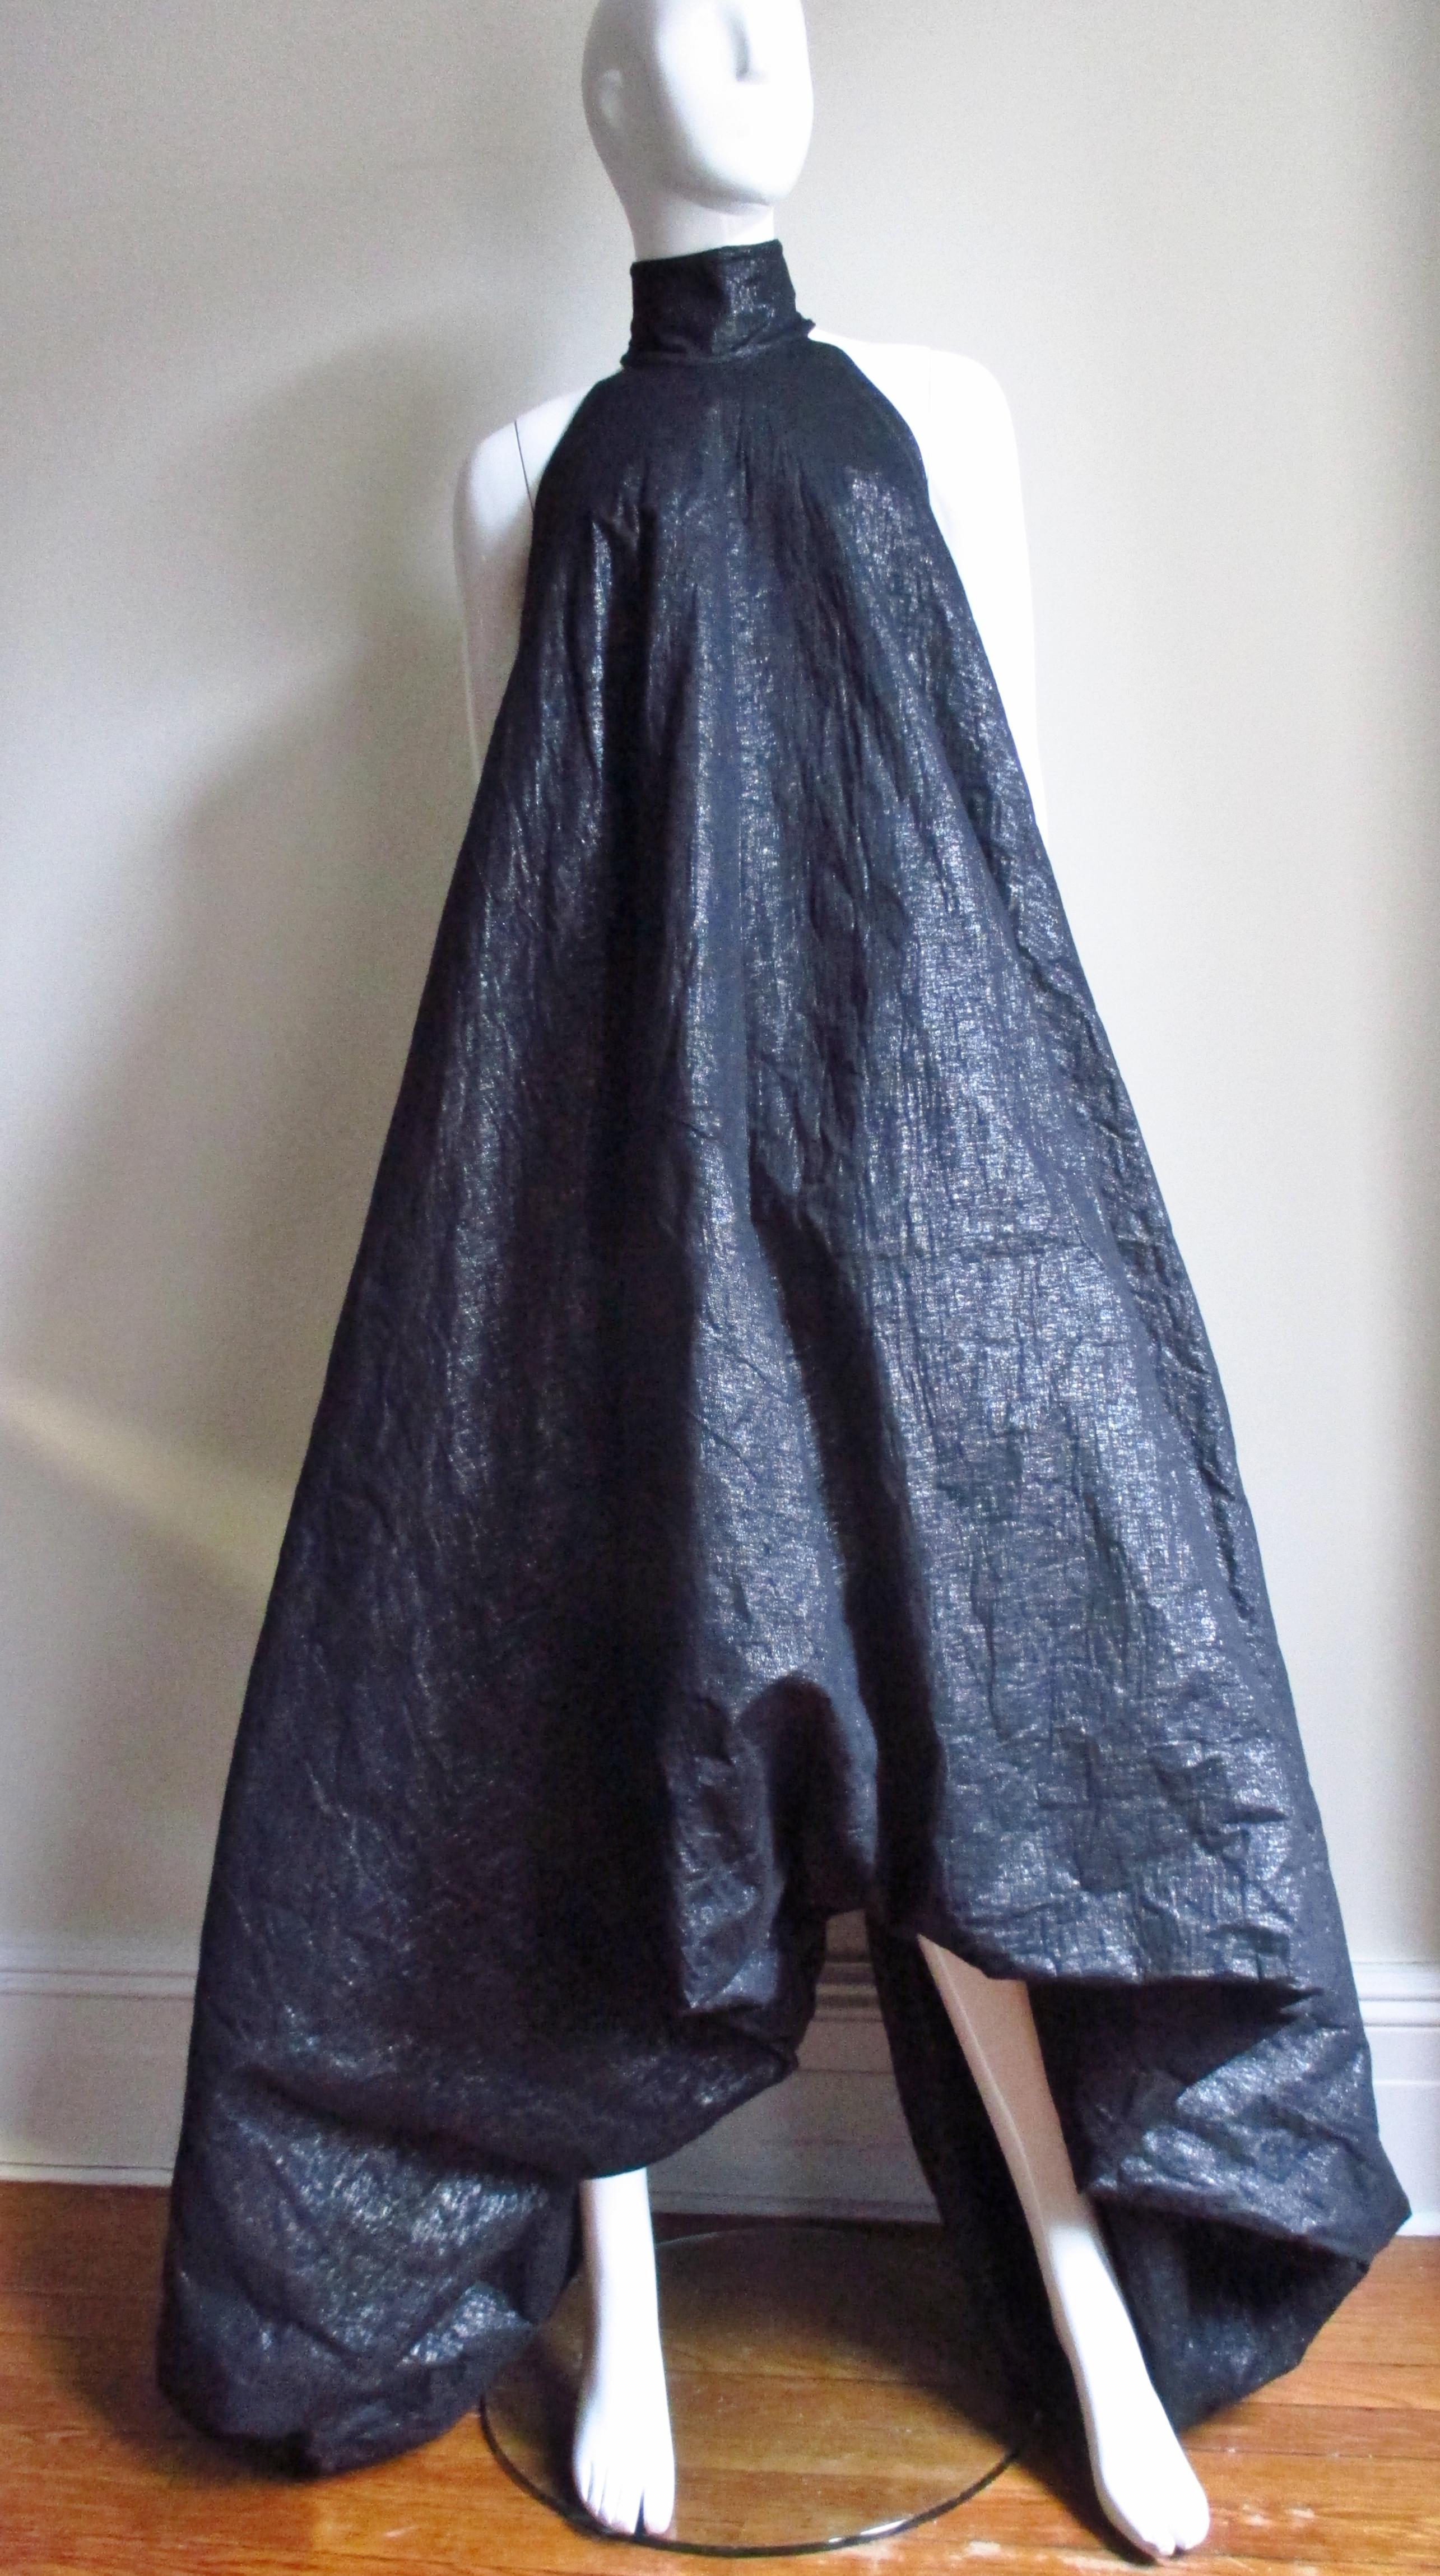 A fabulous maxi dress gown from Gareth Pugh in a black cotton/silk blend with a subtle shine. The silhouette is dramatic- narrow at the stand up collar and cut in shoulders then becoming wider towards the hemline which is shorter in the center front